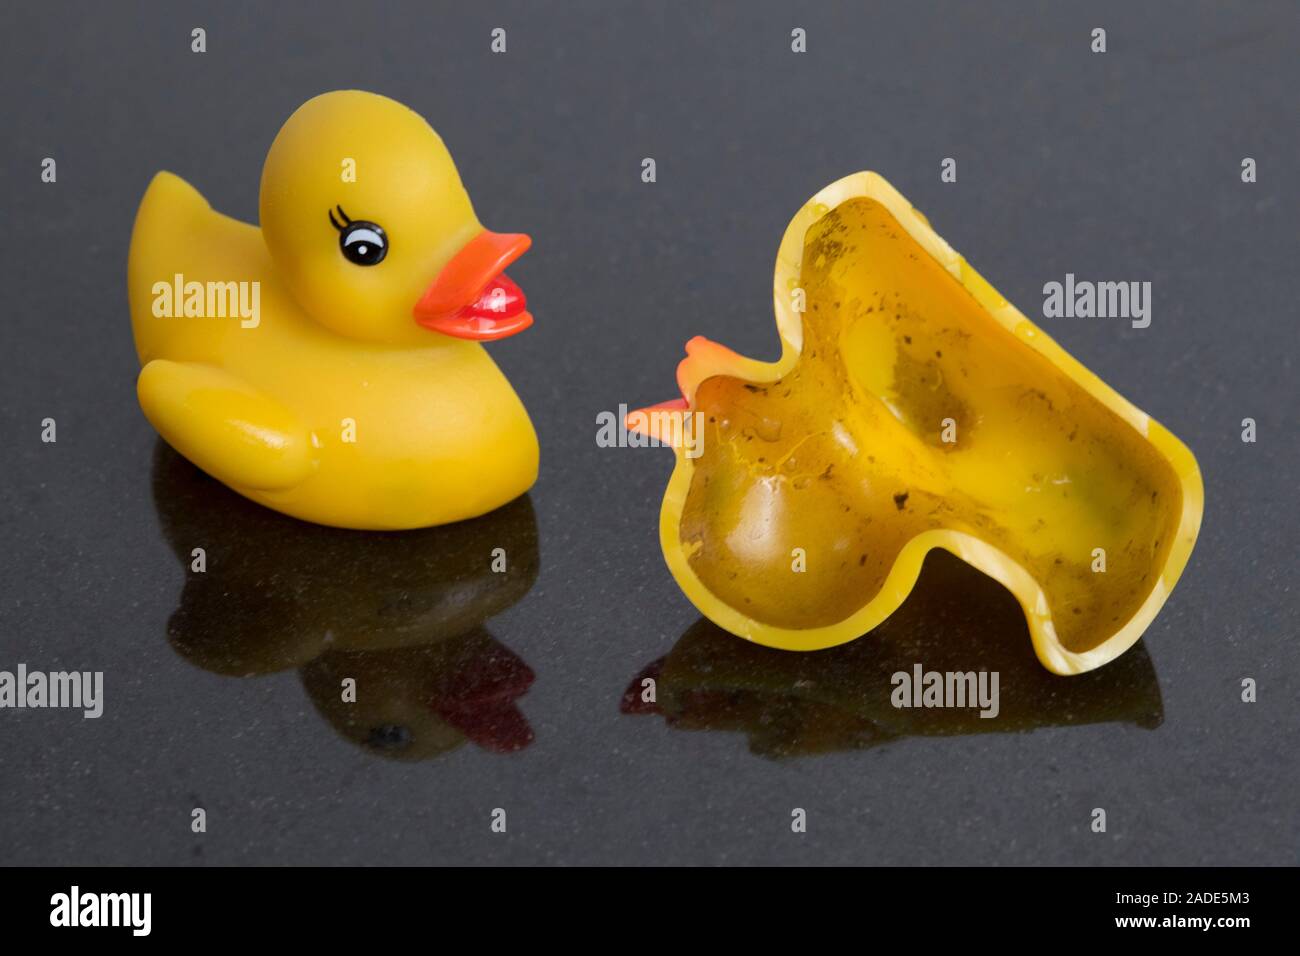 Rubber ducks are a haven for fungus and bacteria, study shows, rubber duck